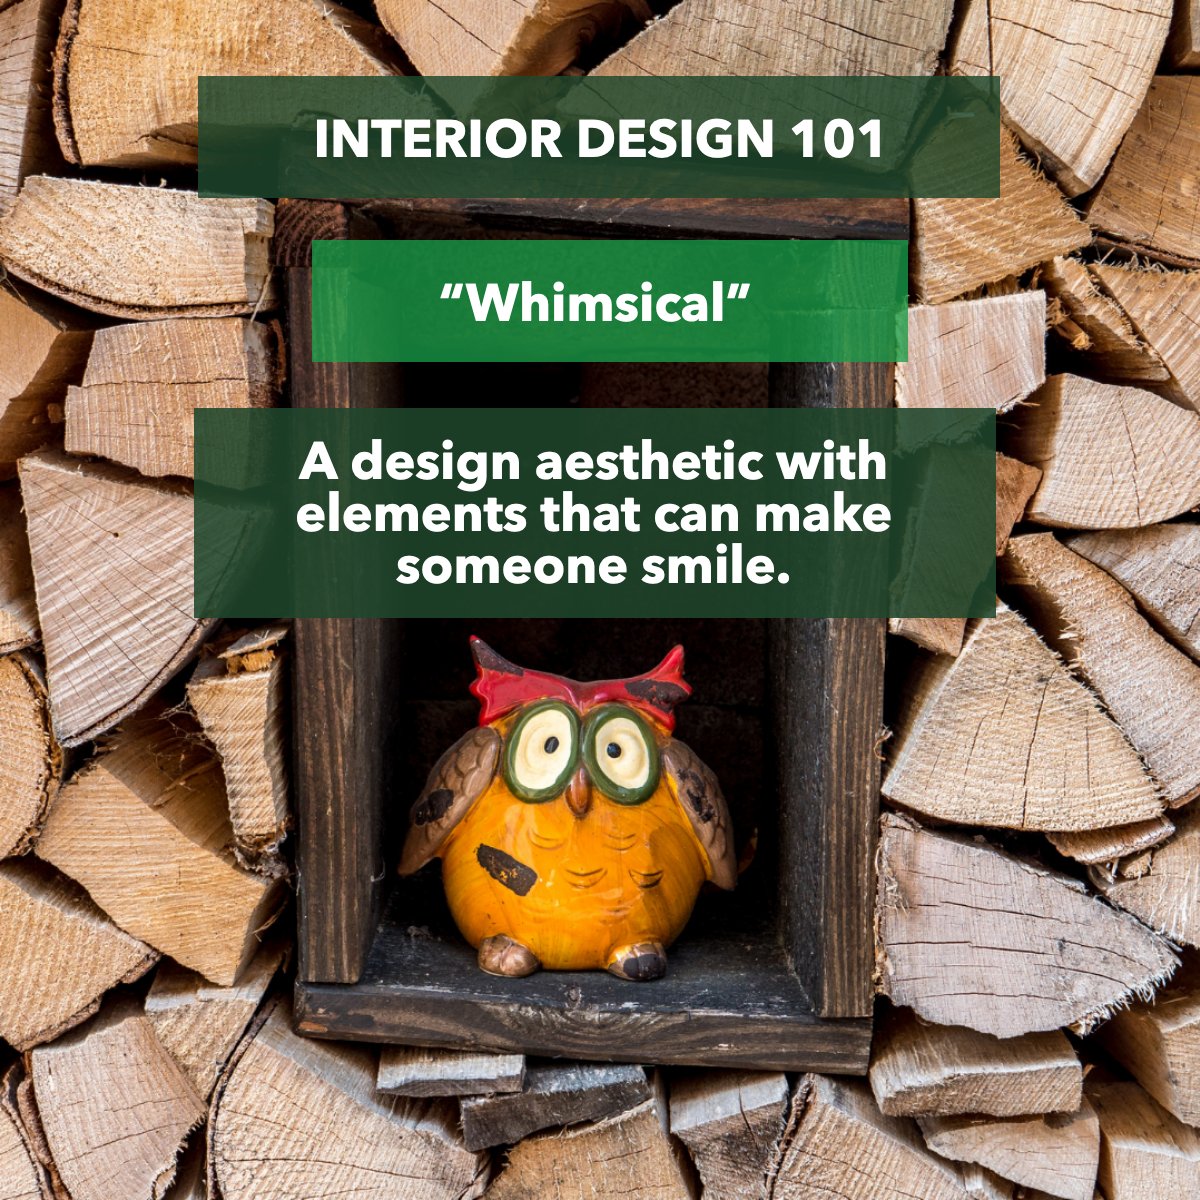 Design aesthetics can evoke emotions.

Have you ever heard about the whimsical aesthetic? 👍

#interiorsdesign #interiortrends #interiordesigning #interiordesigntrends #interiorsaddict #interiordesigntips #interiordesigngoals 

 #OhioRealEstate #AkronRealtor